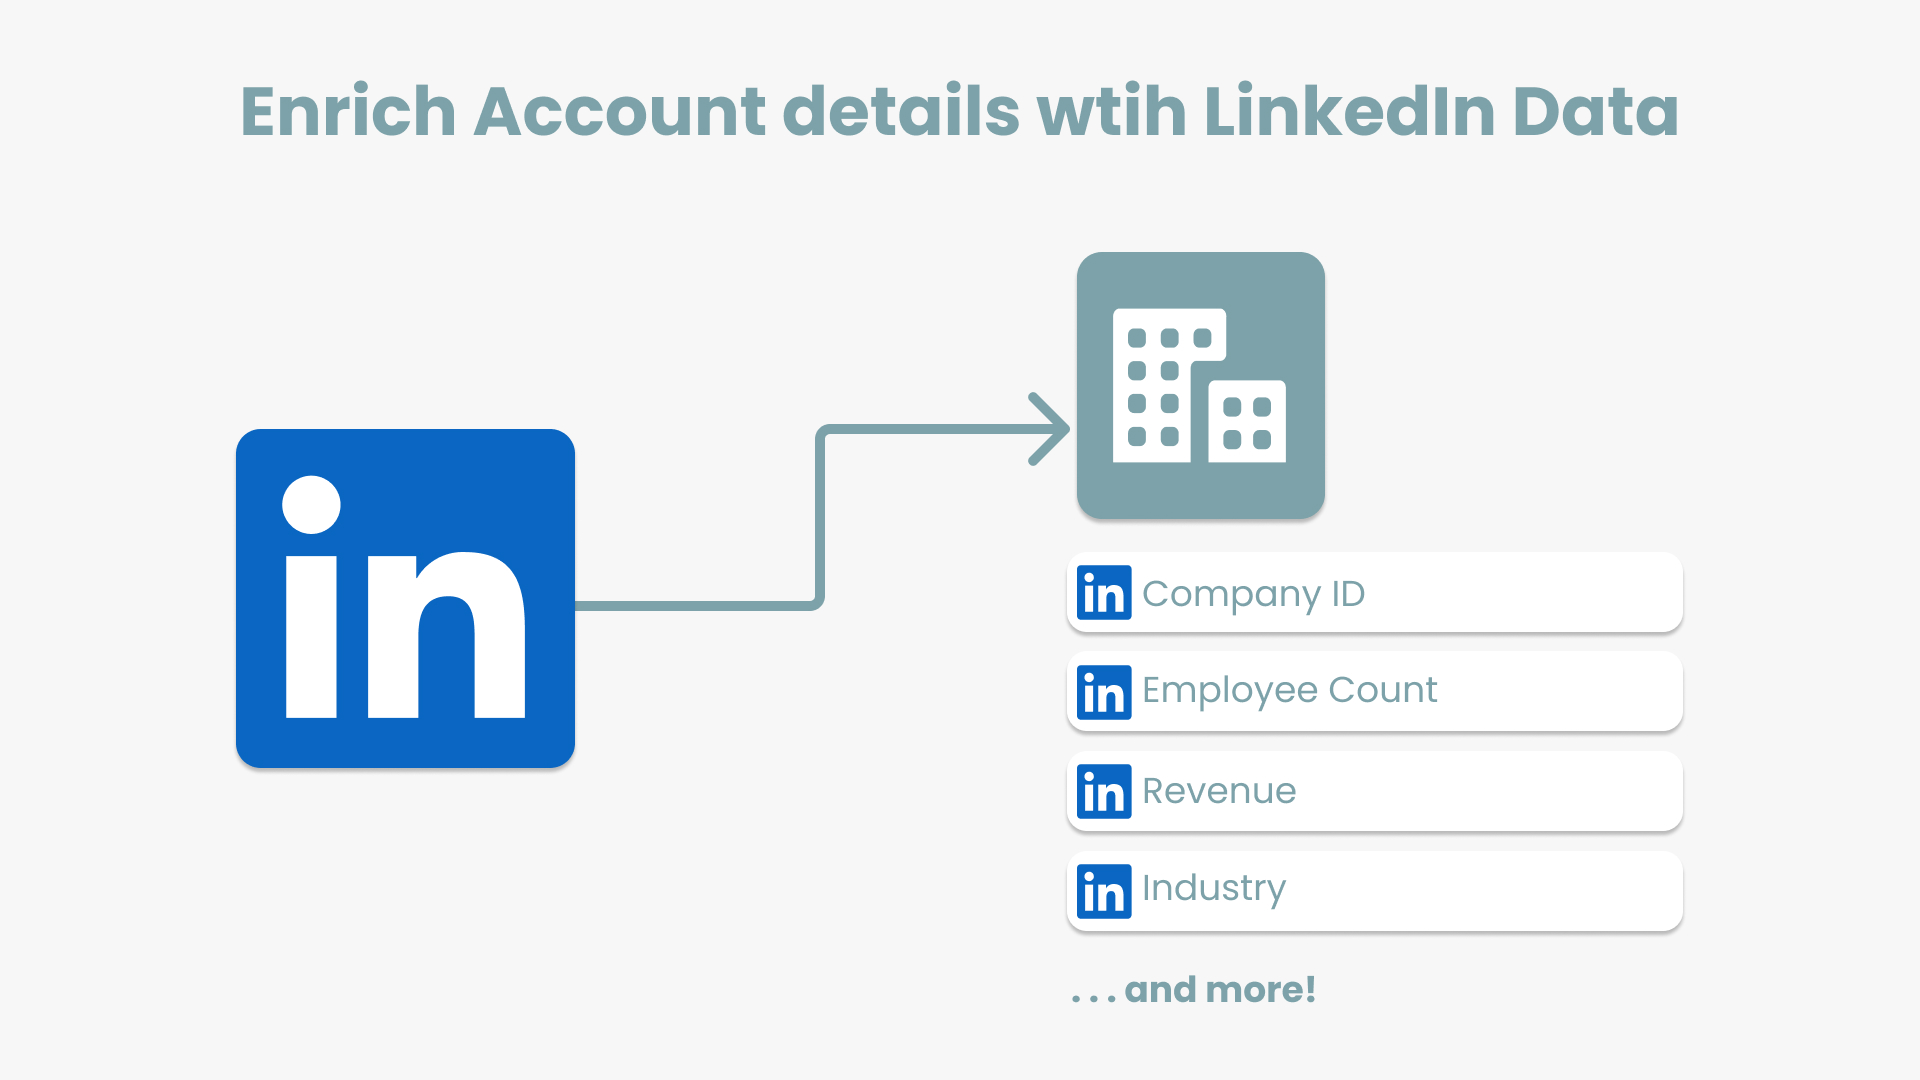 This image shows how Delpha can import data from LinkedIn into your Salesforce Accounts.